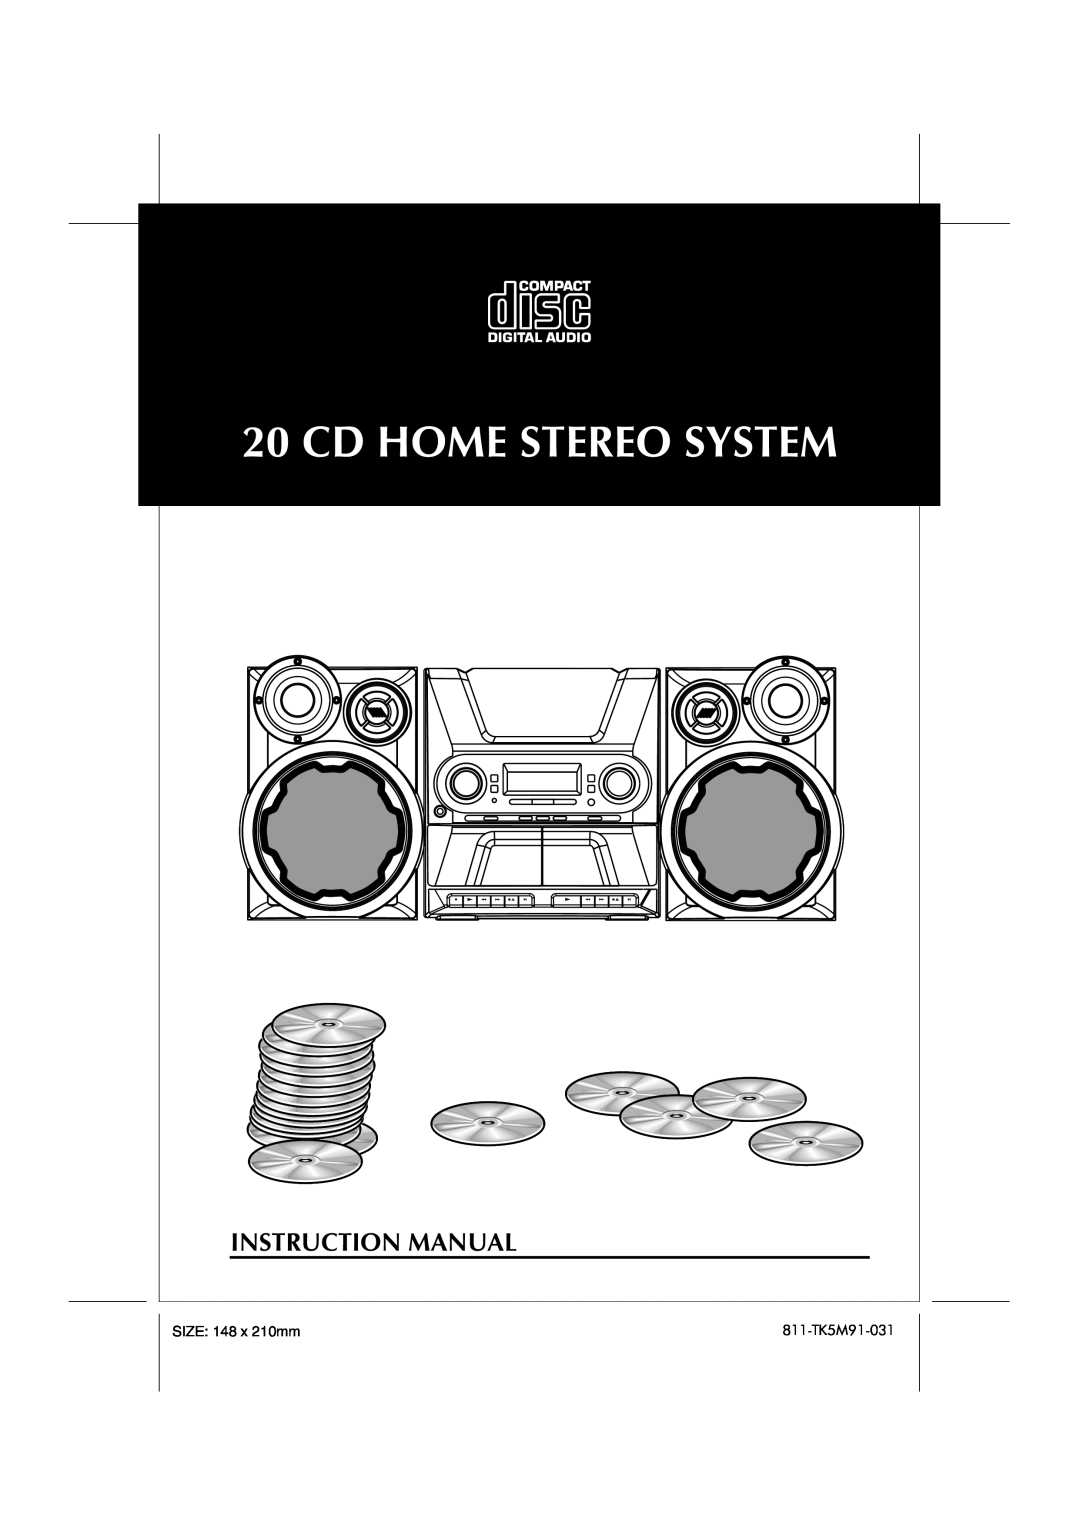 HiFi Works 811-TK5M91-031 instruction manual Cd Home Stereo System, SIZE 148 x 210mm 